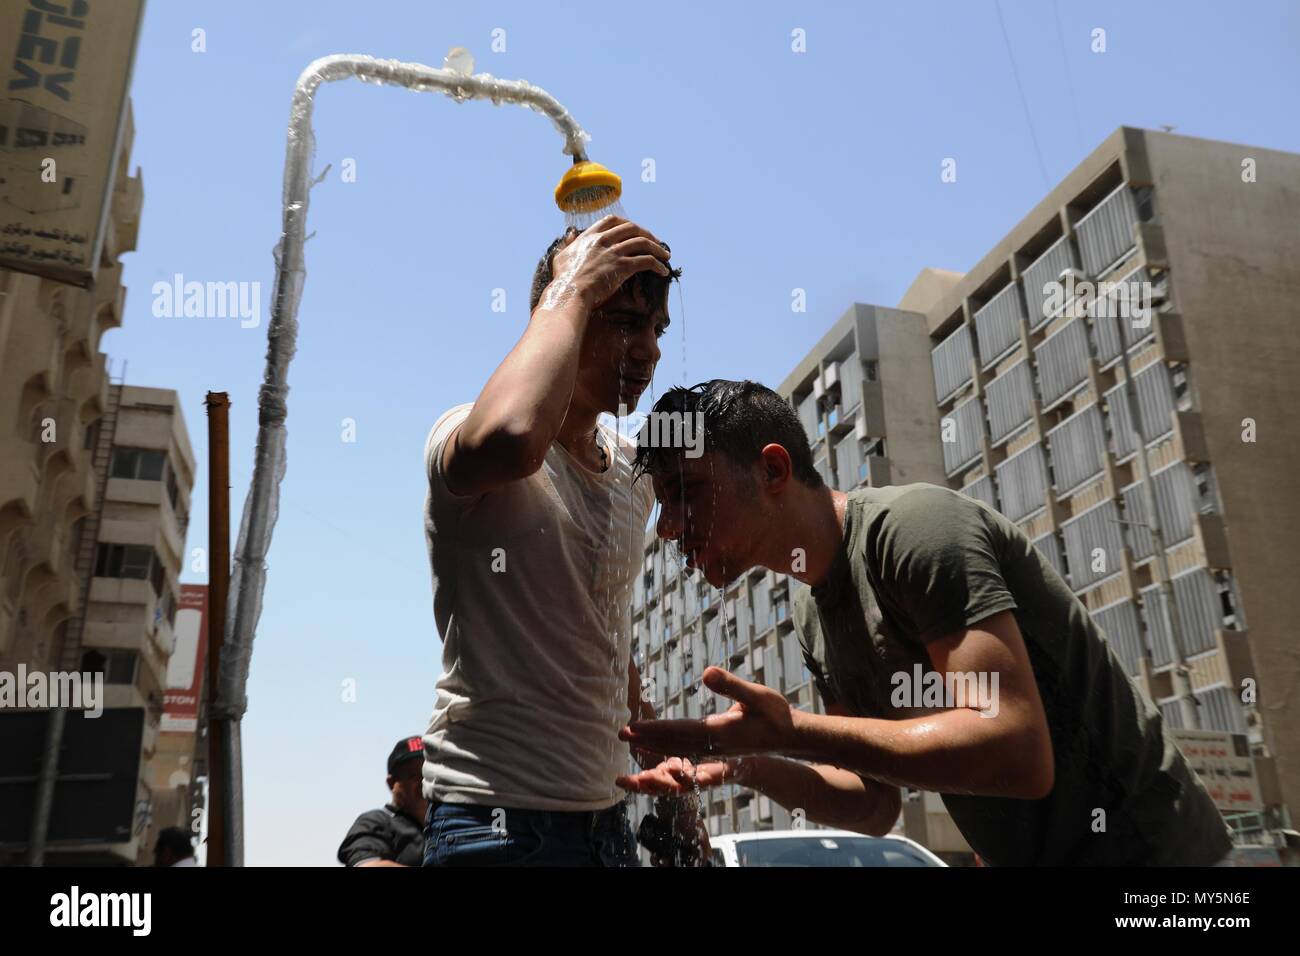 Baghdad, Iraq. 6th June, 2018. People cool off themselves as the temperature rises upon 40 degrees Celsius in Baghdad, Iraq, June 6, 2018. Credit: Khalil Dawood/Xinhua/Alamy Live News Stock Photo